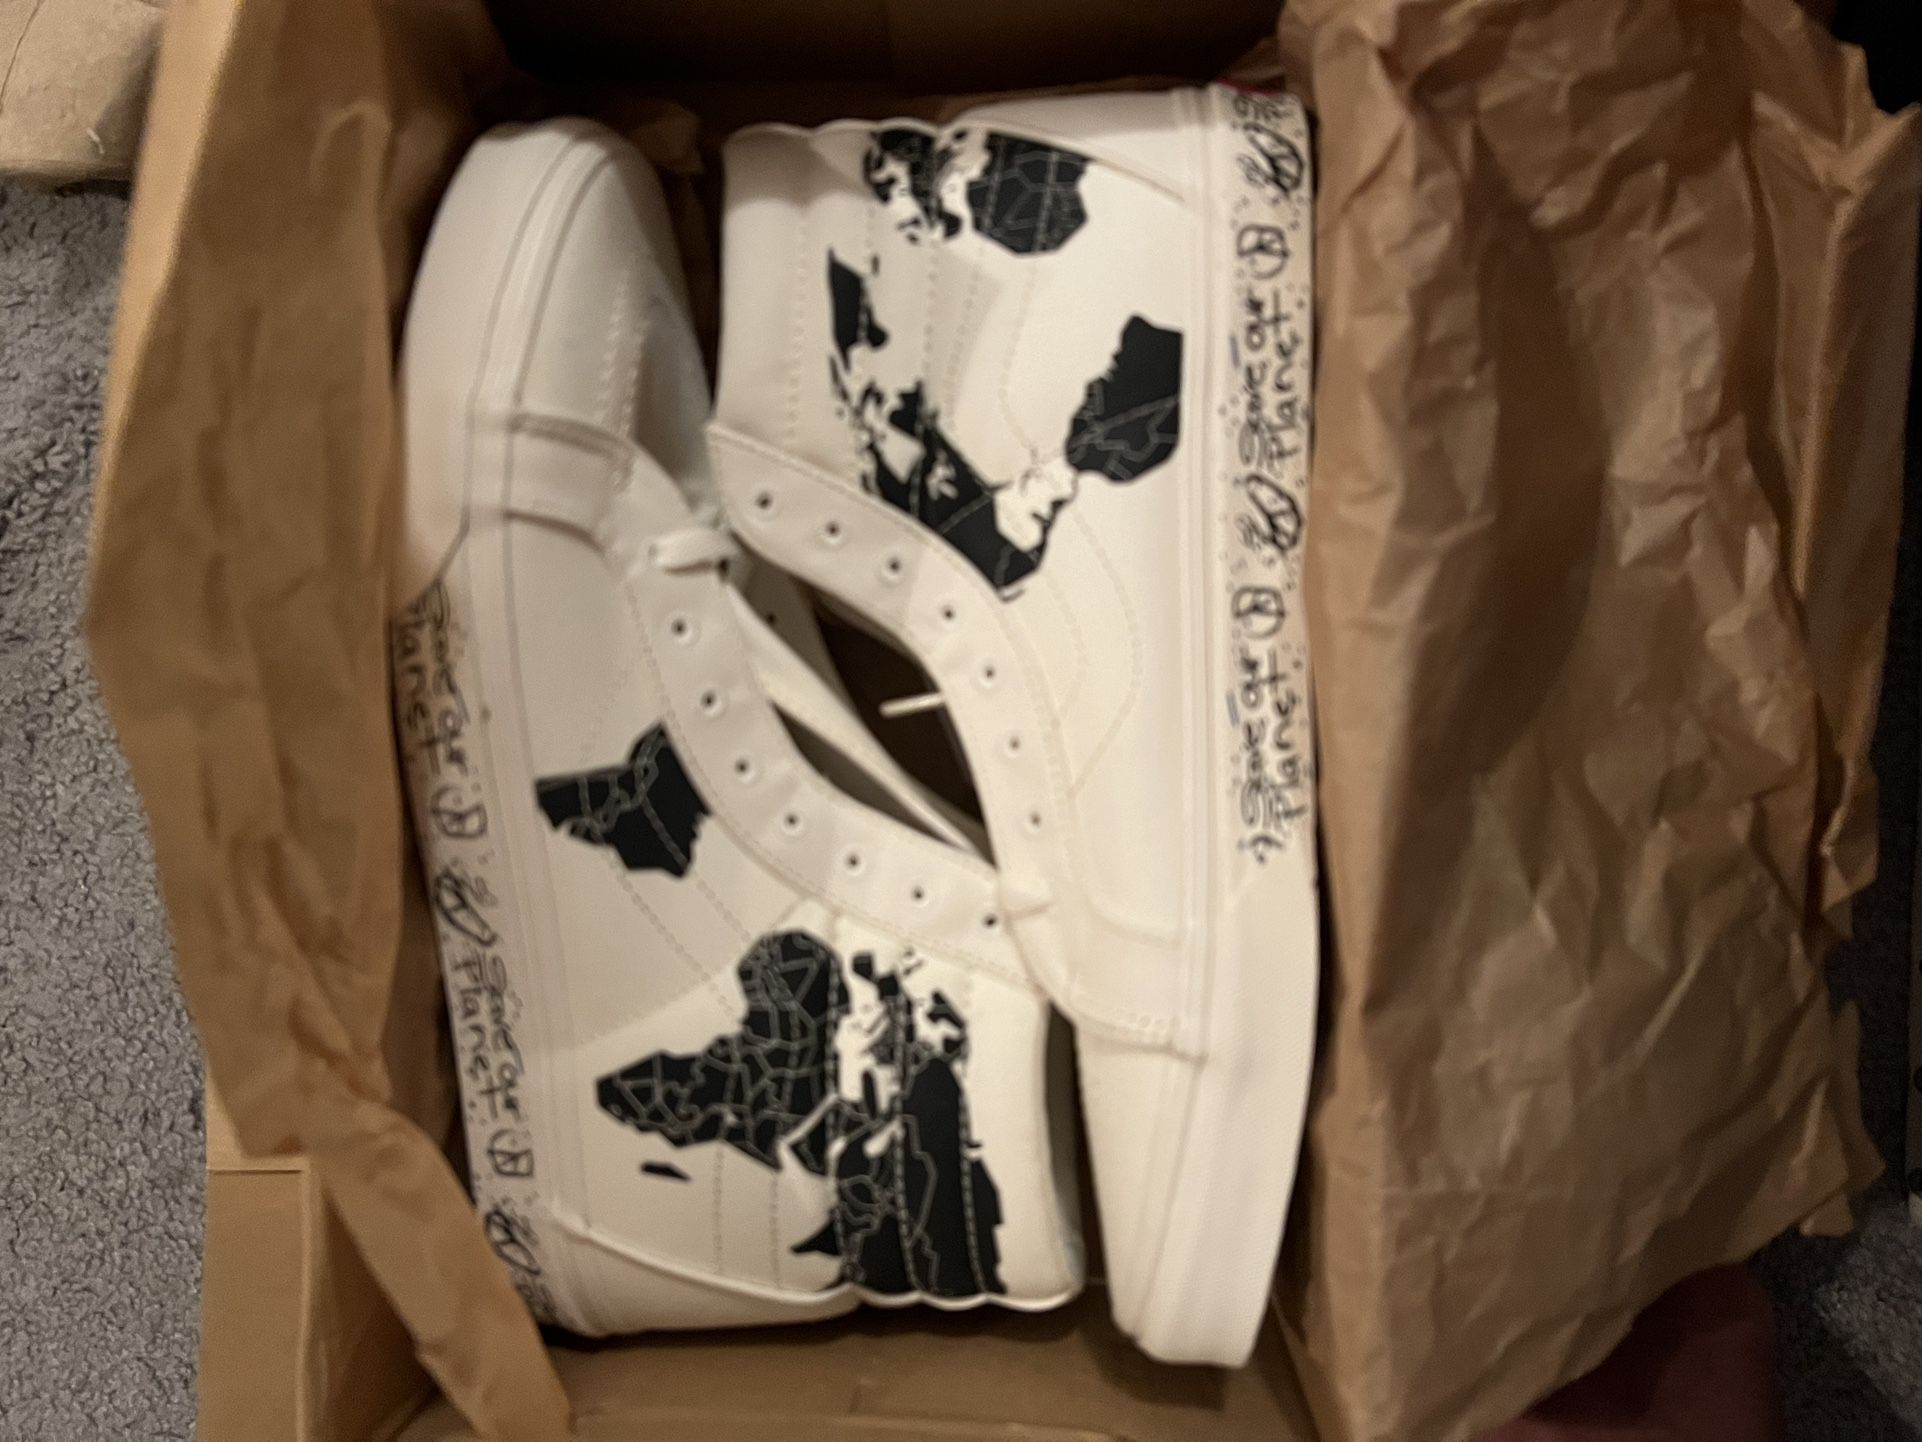 Vans Sk8-Hi Re-Issue Save Our Planet Classic White/Black Sneakers